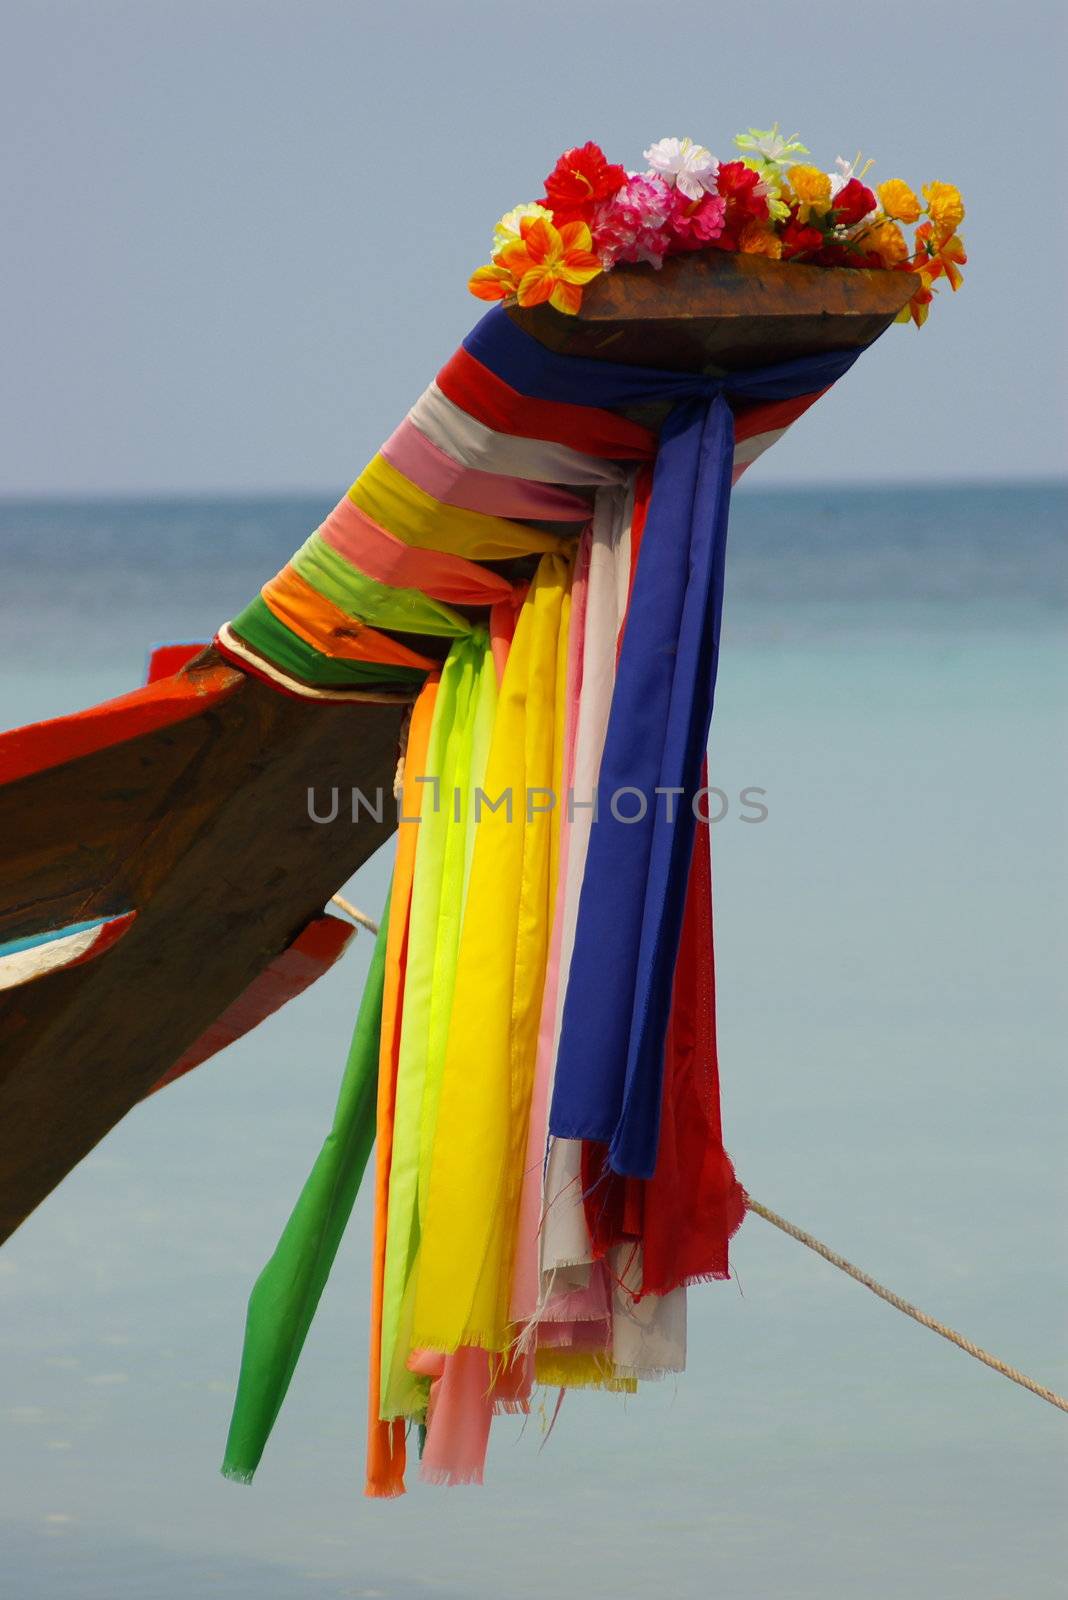 Longtail boat with colored prayer flags